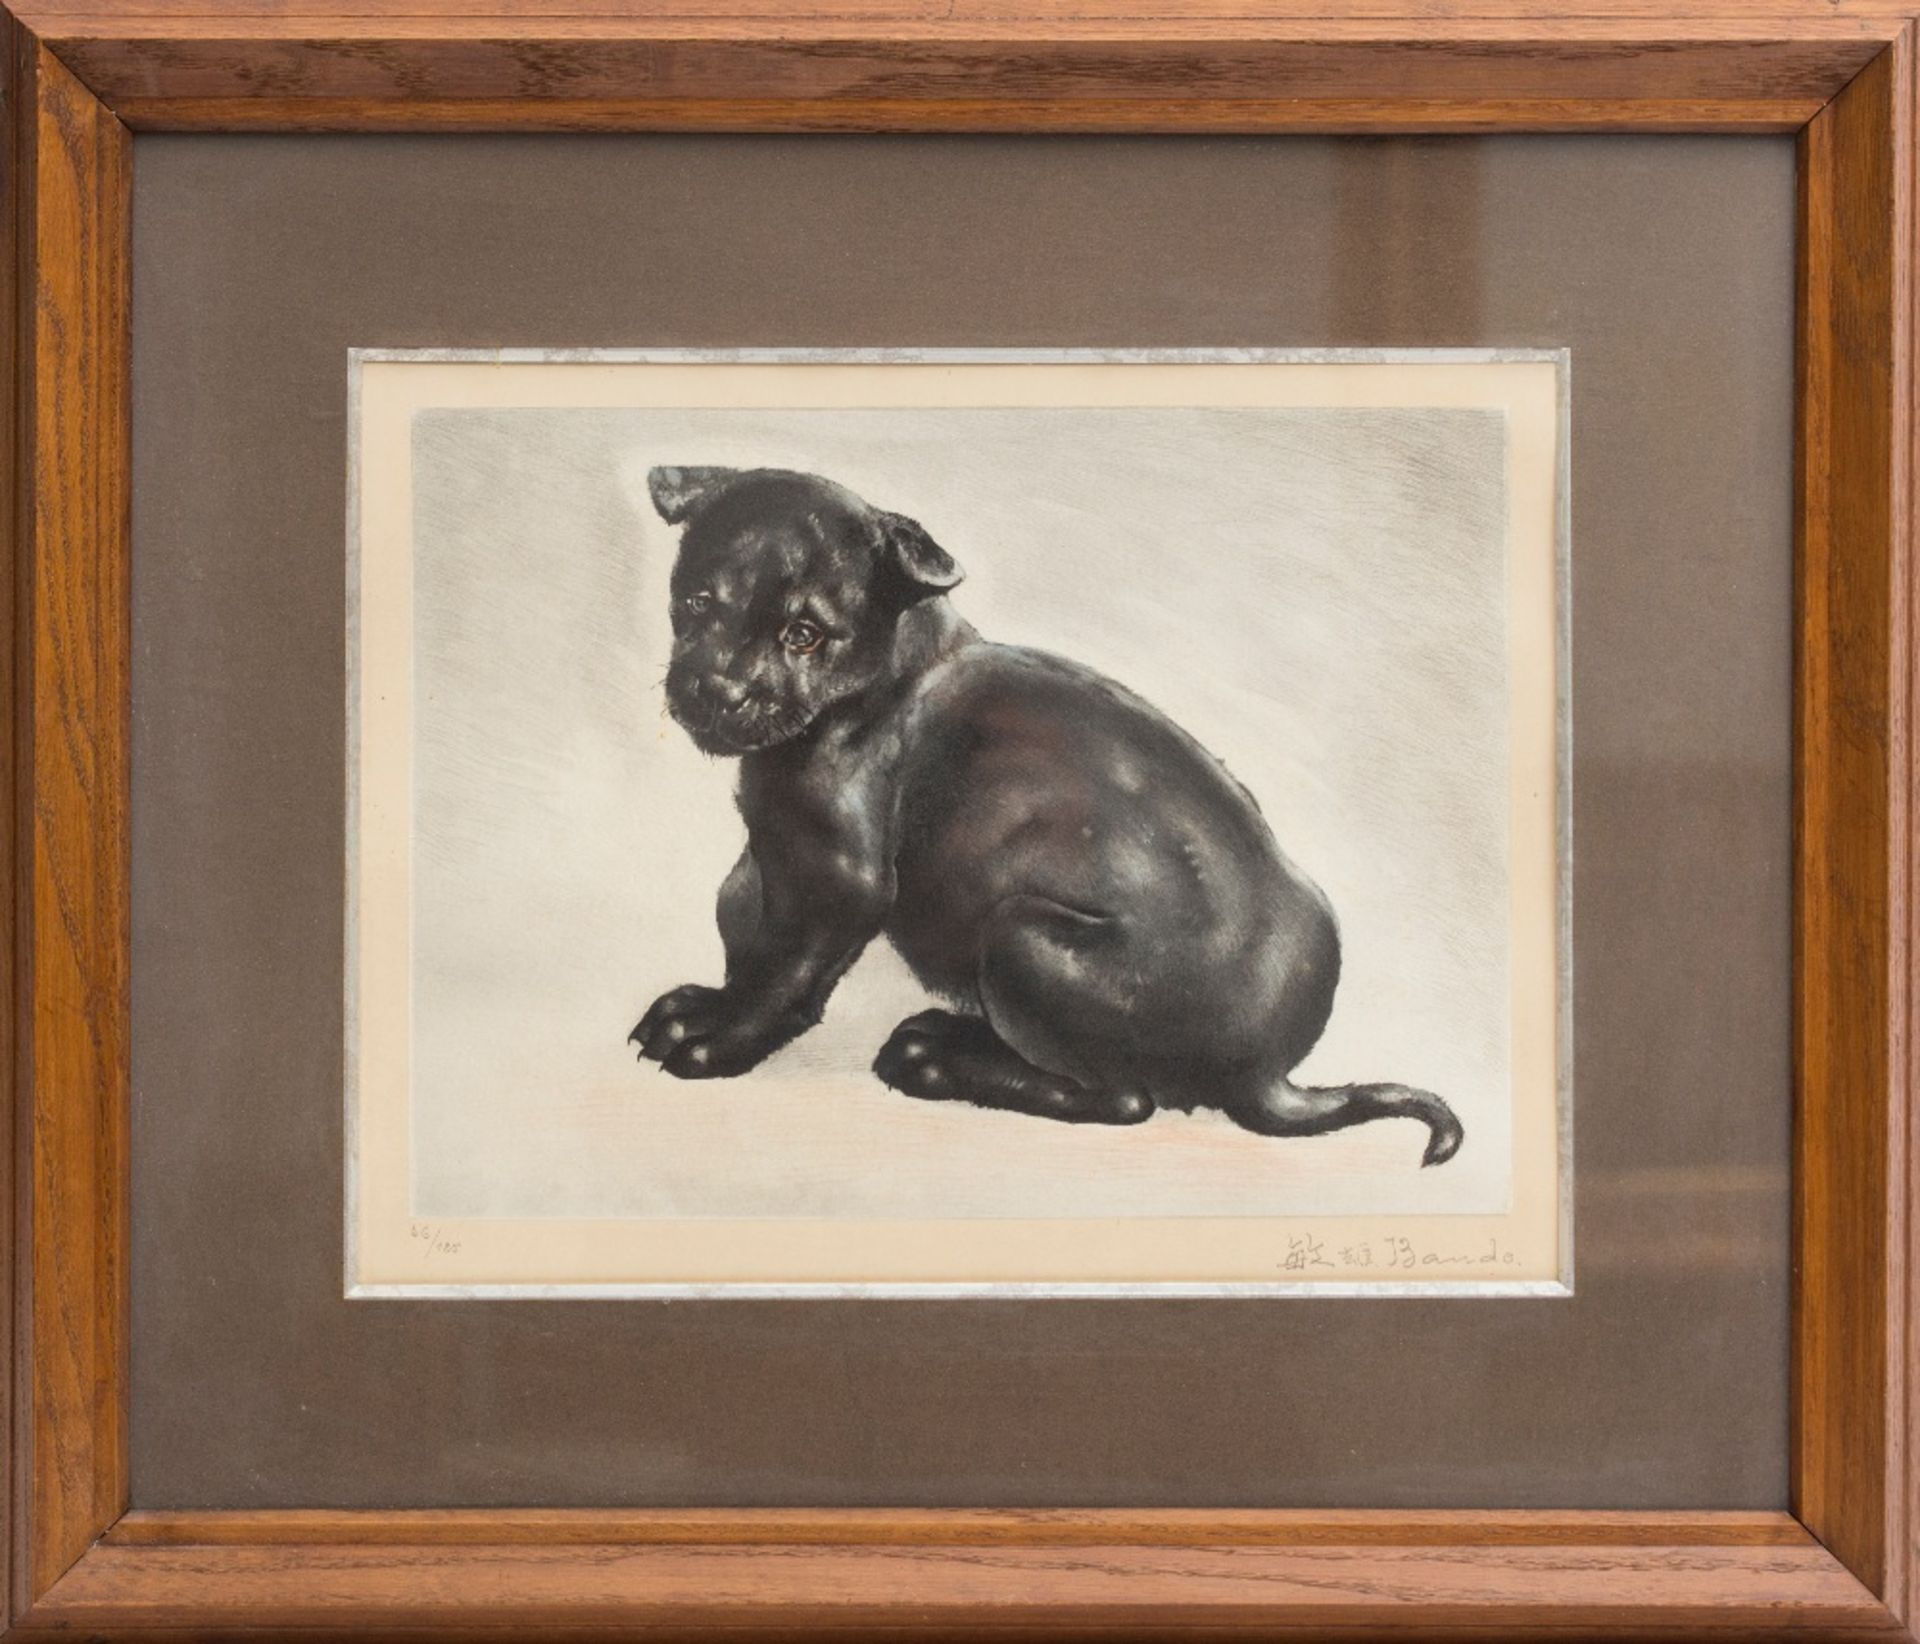 Toshio Bando (Japan 1895-1973)The puppy; Soft-ground, dry-point engraving. Signed in the margin